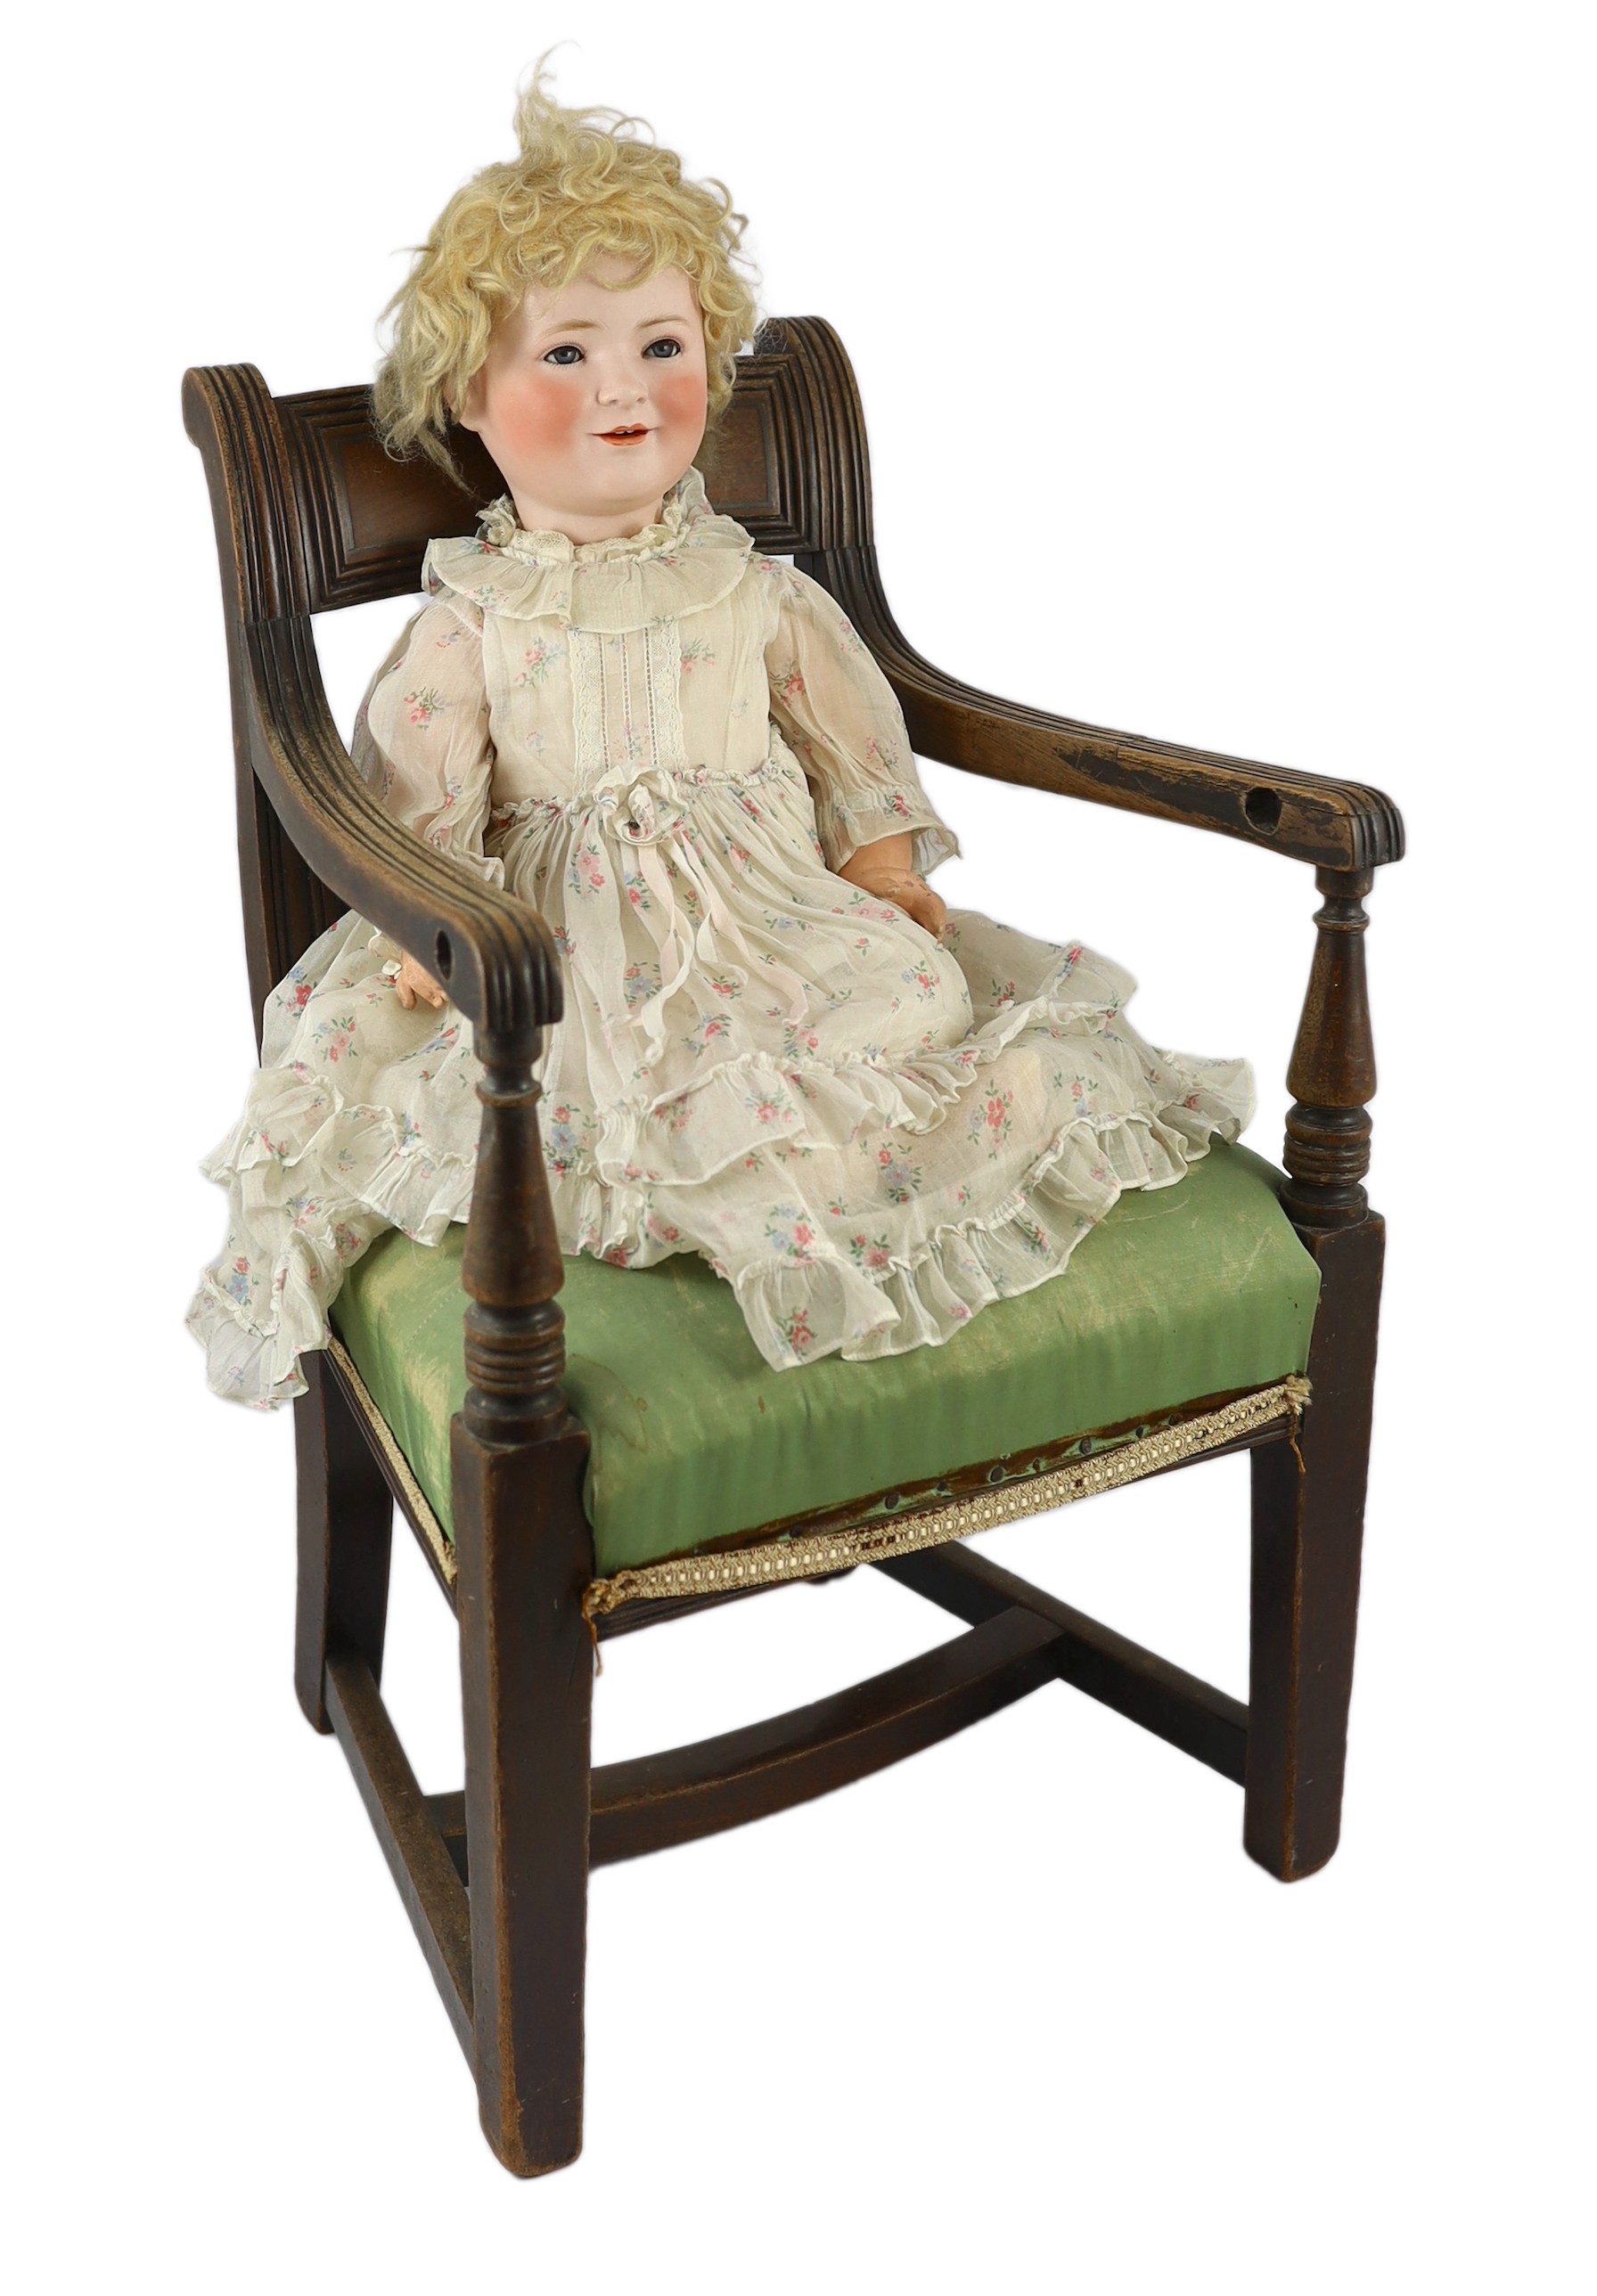 A Schoenau & Hoffmeister bisque 'Princess Elizabeth' doll, German, circa 1928, 21in. Please note the chair is for display purposes only.                                                                                    